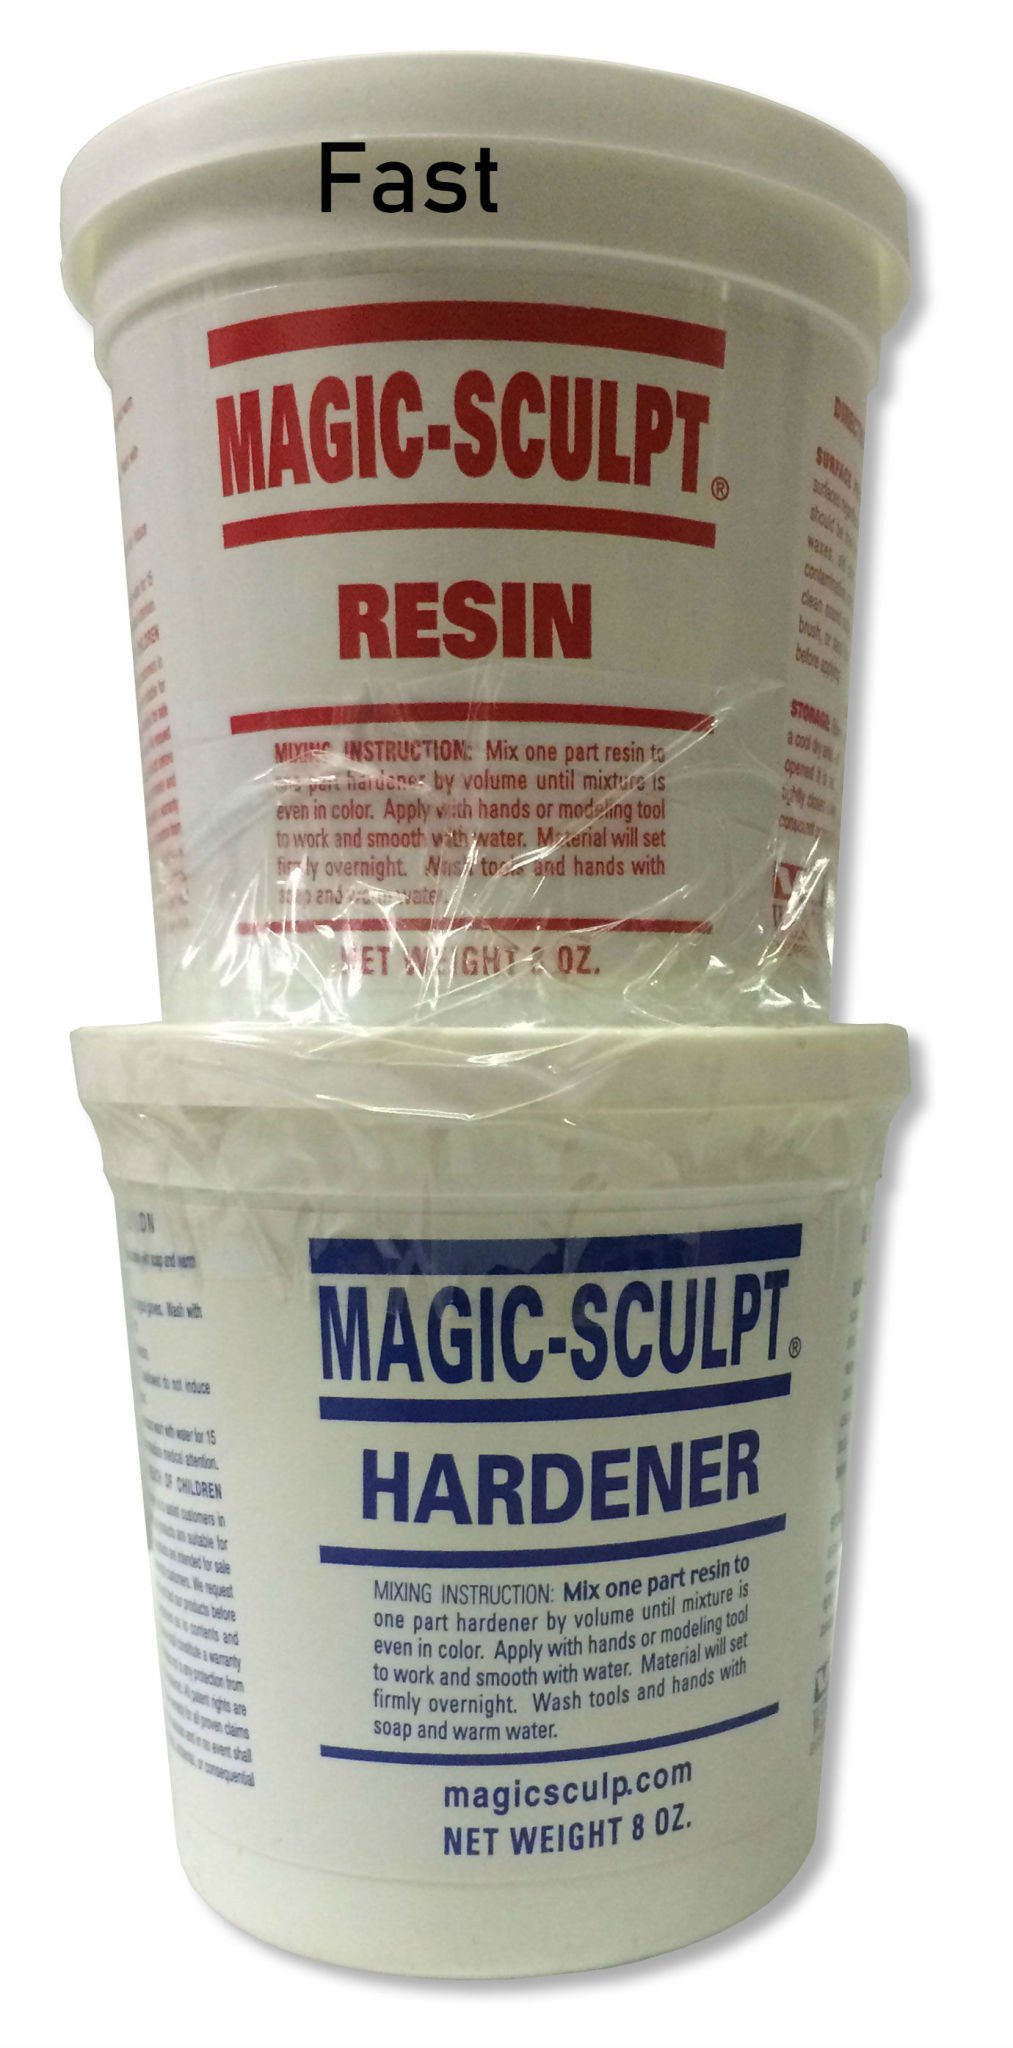 Using Magic Sculpt to Harden Almost Anything : 9 Steps - Instructables